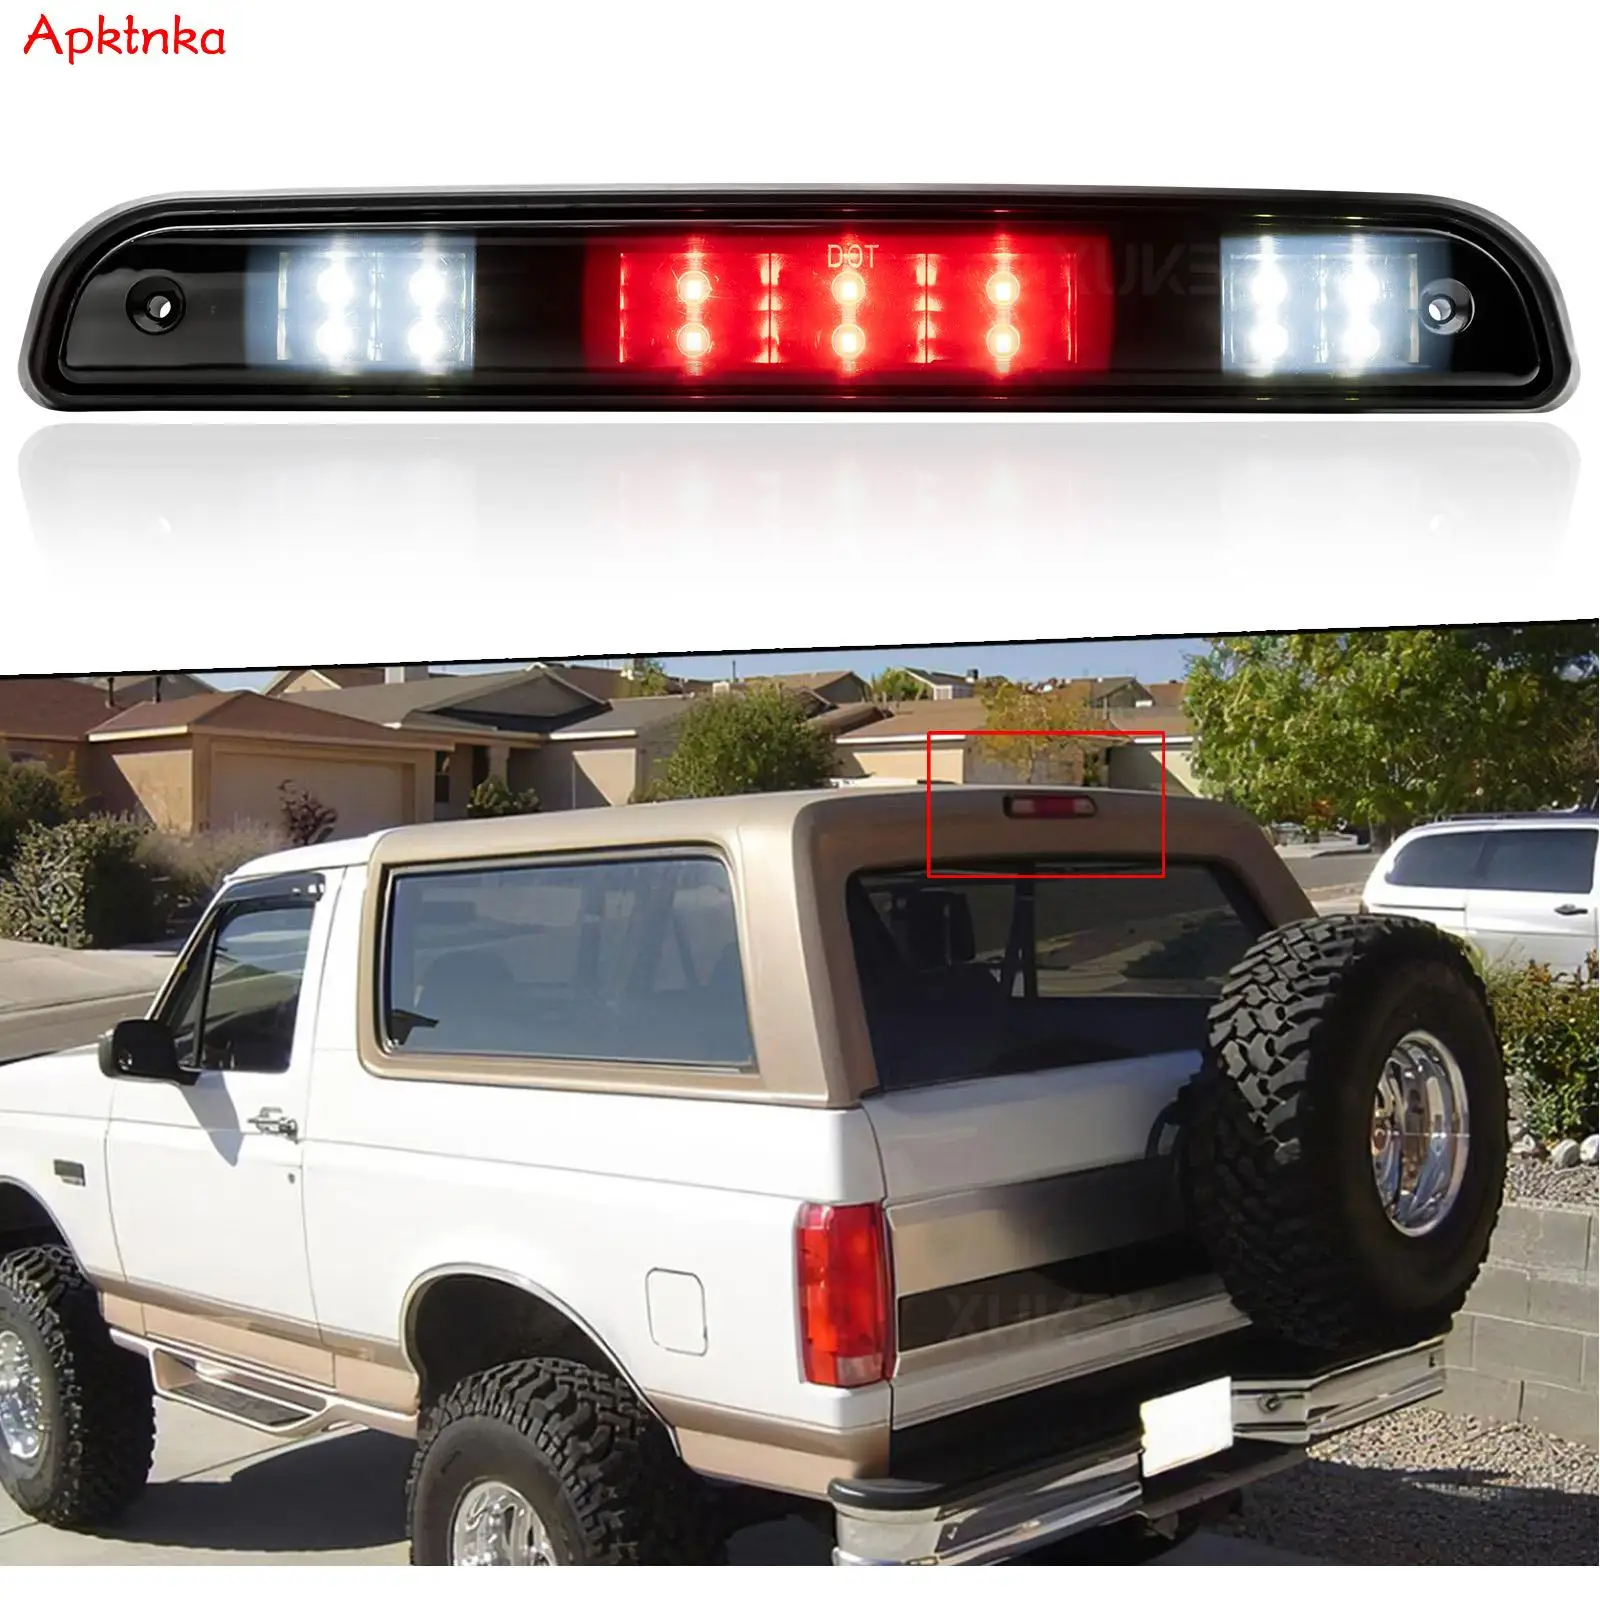 3rd Third Brake Light Cargo Lamp High Mount Stop LED Replacement For Ford F150 F250 F350 Bronco 92-96 Tail Reverse Smoked Lens